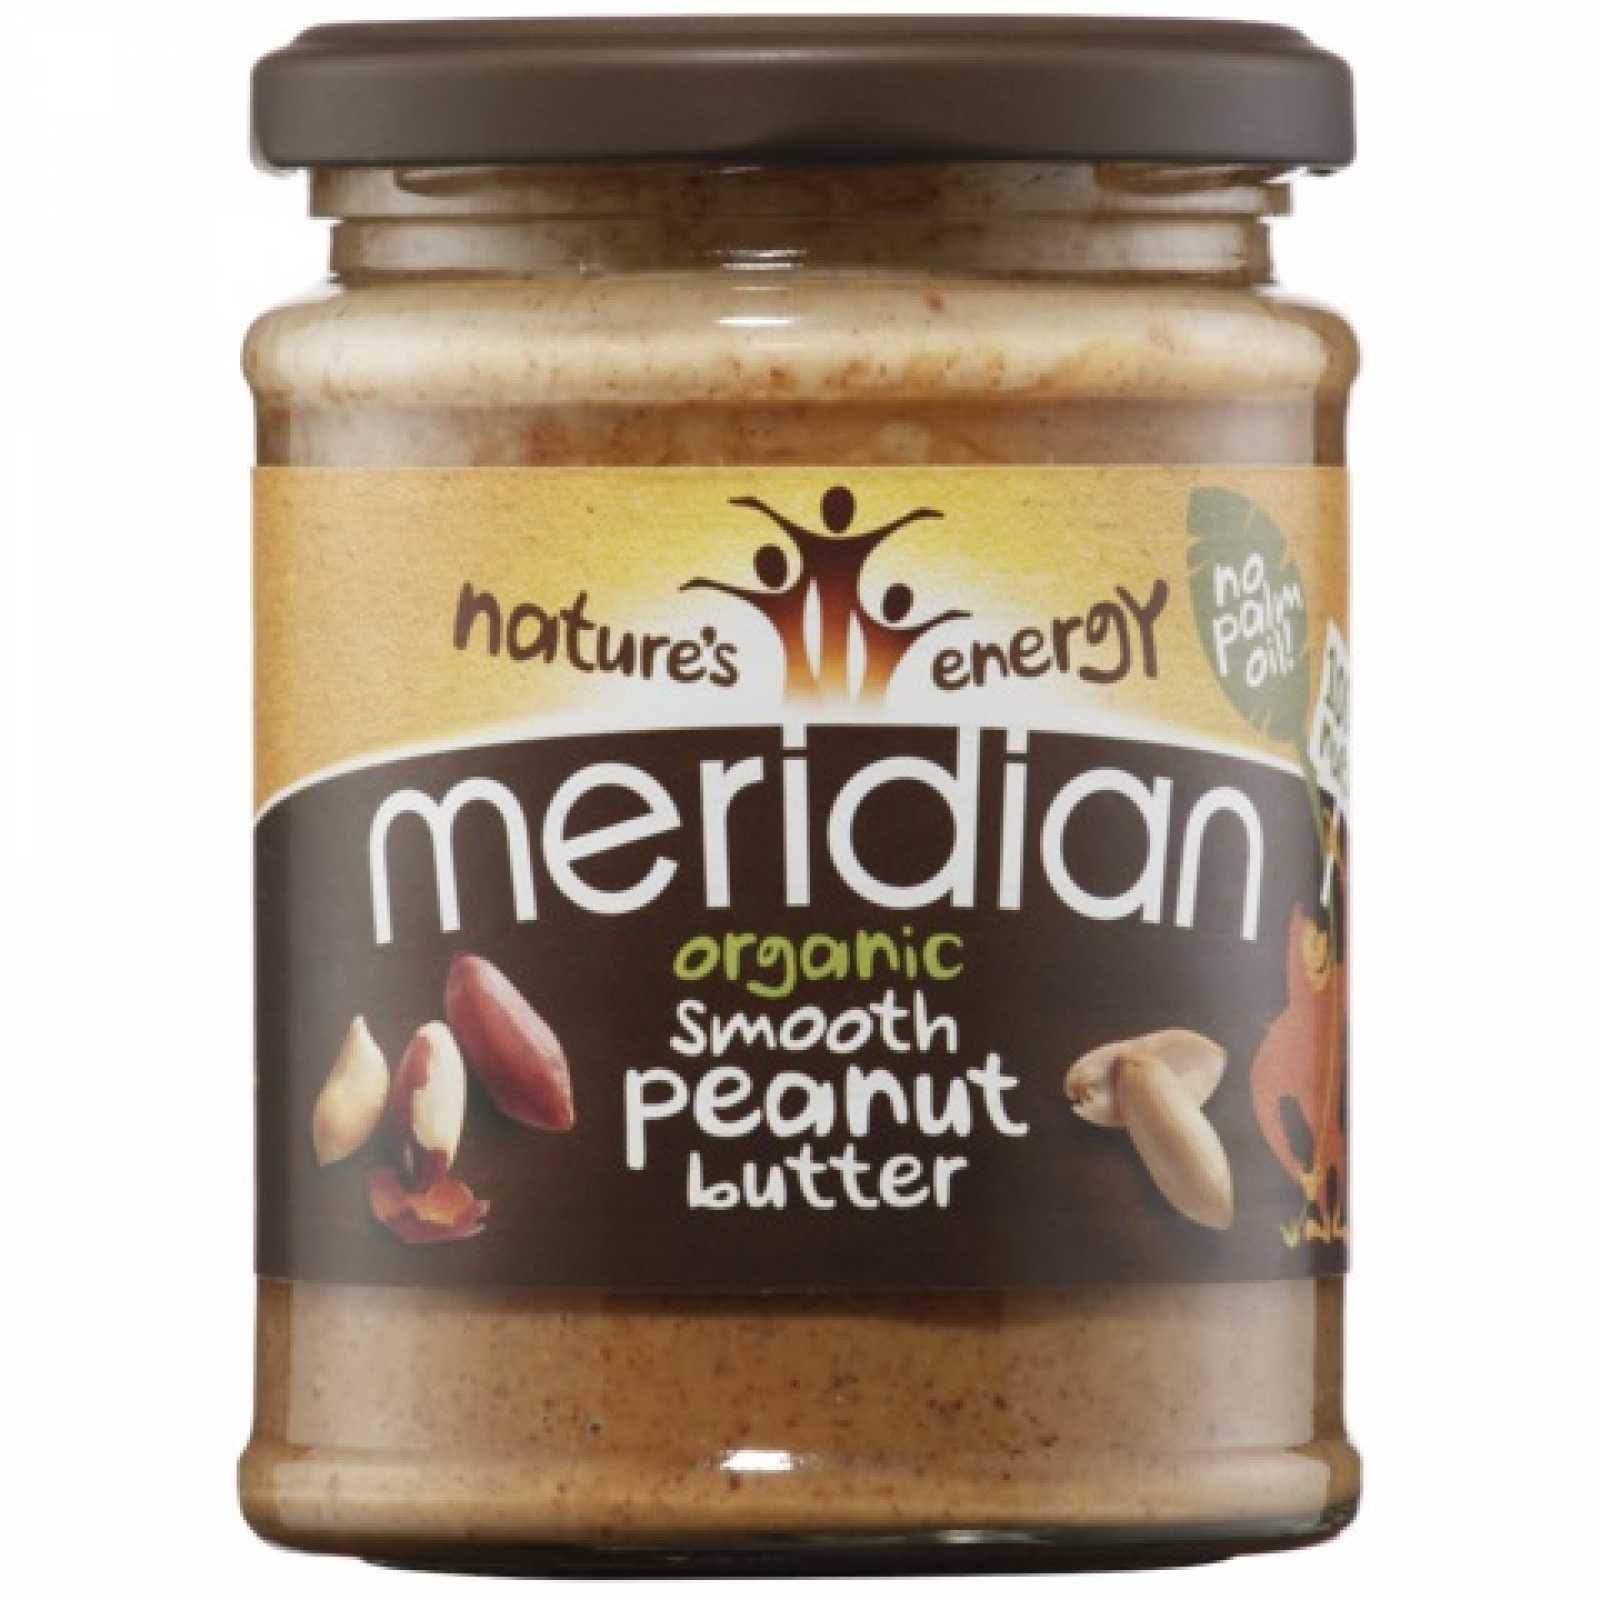 Natures Energy Meridian Organic Smooth Peanut Butter - 280g